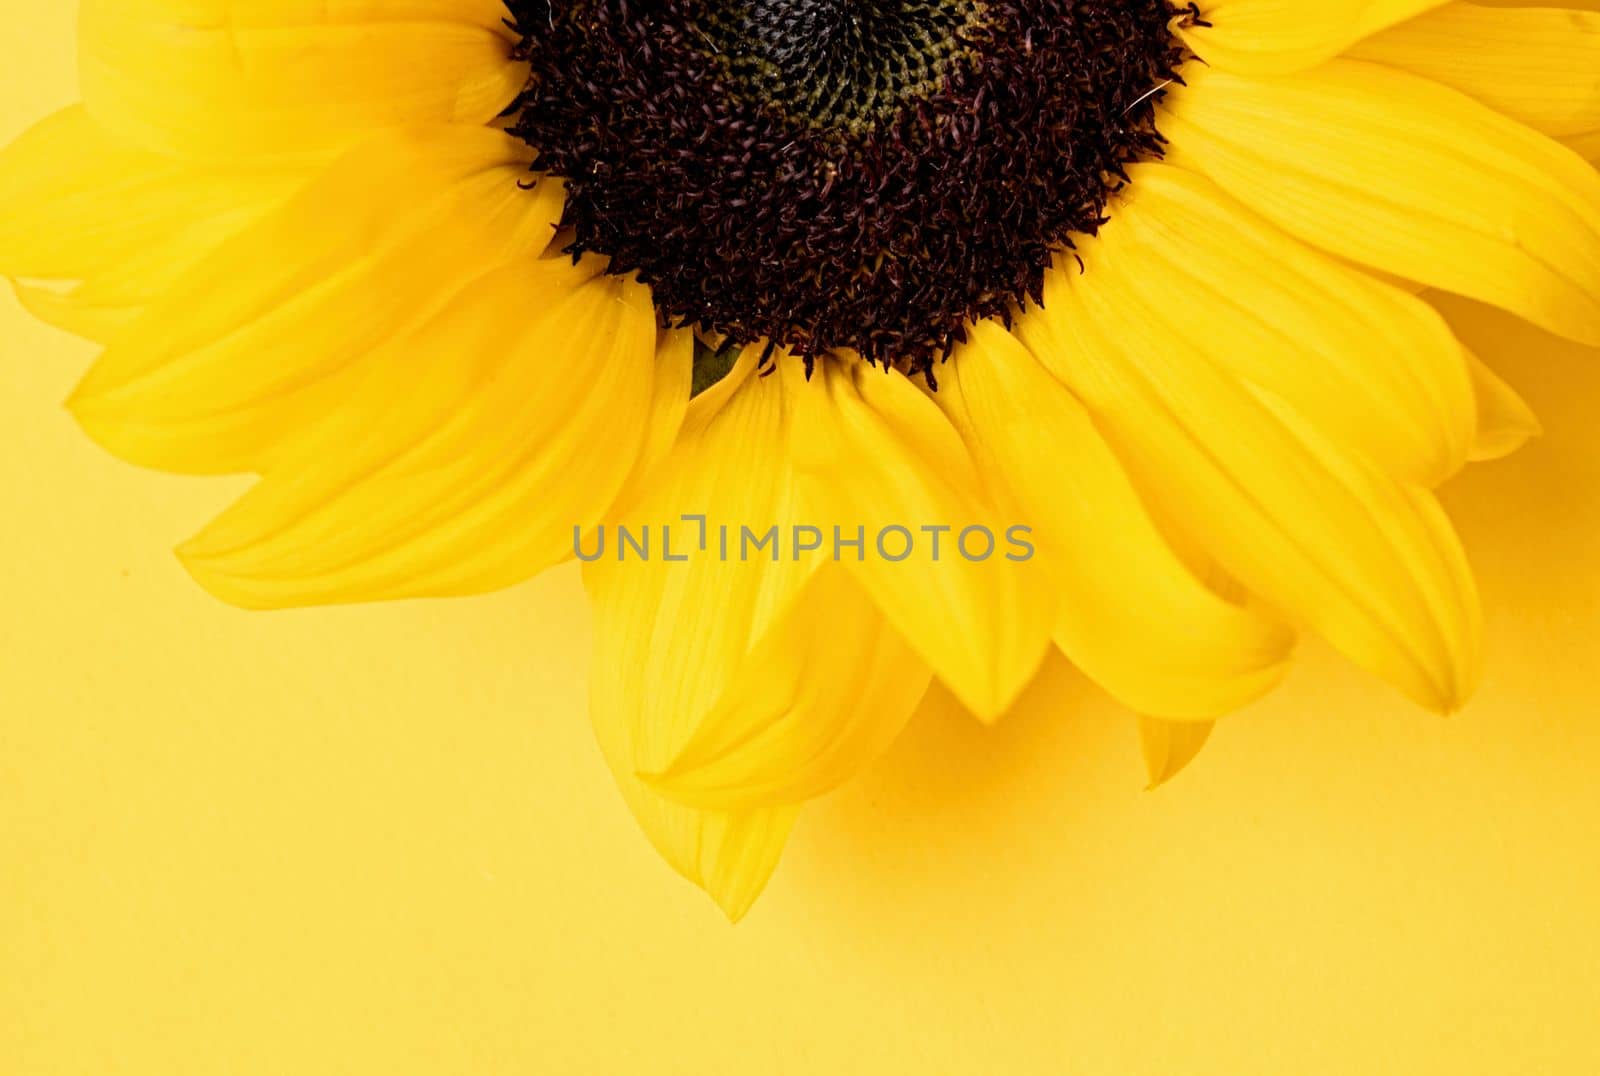 sunflower head on yellow background with copy space, minimal by Desperada